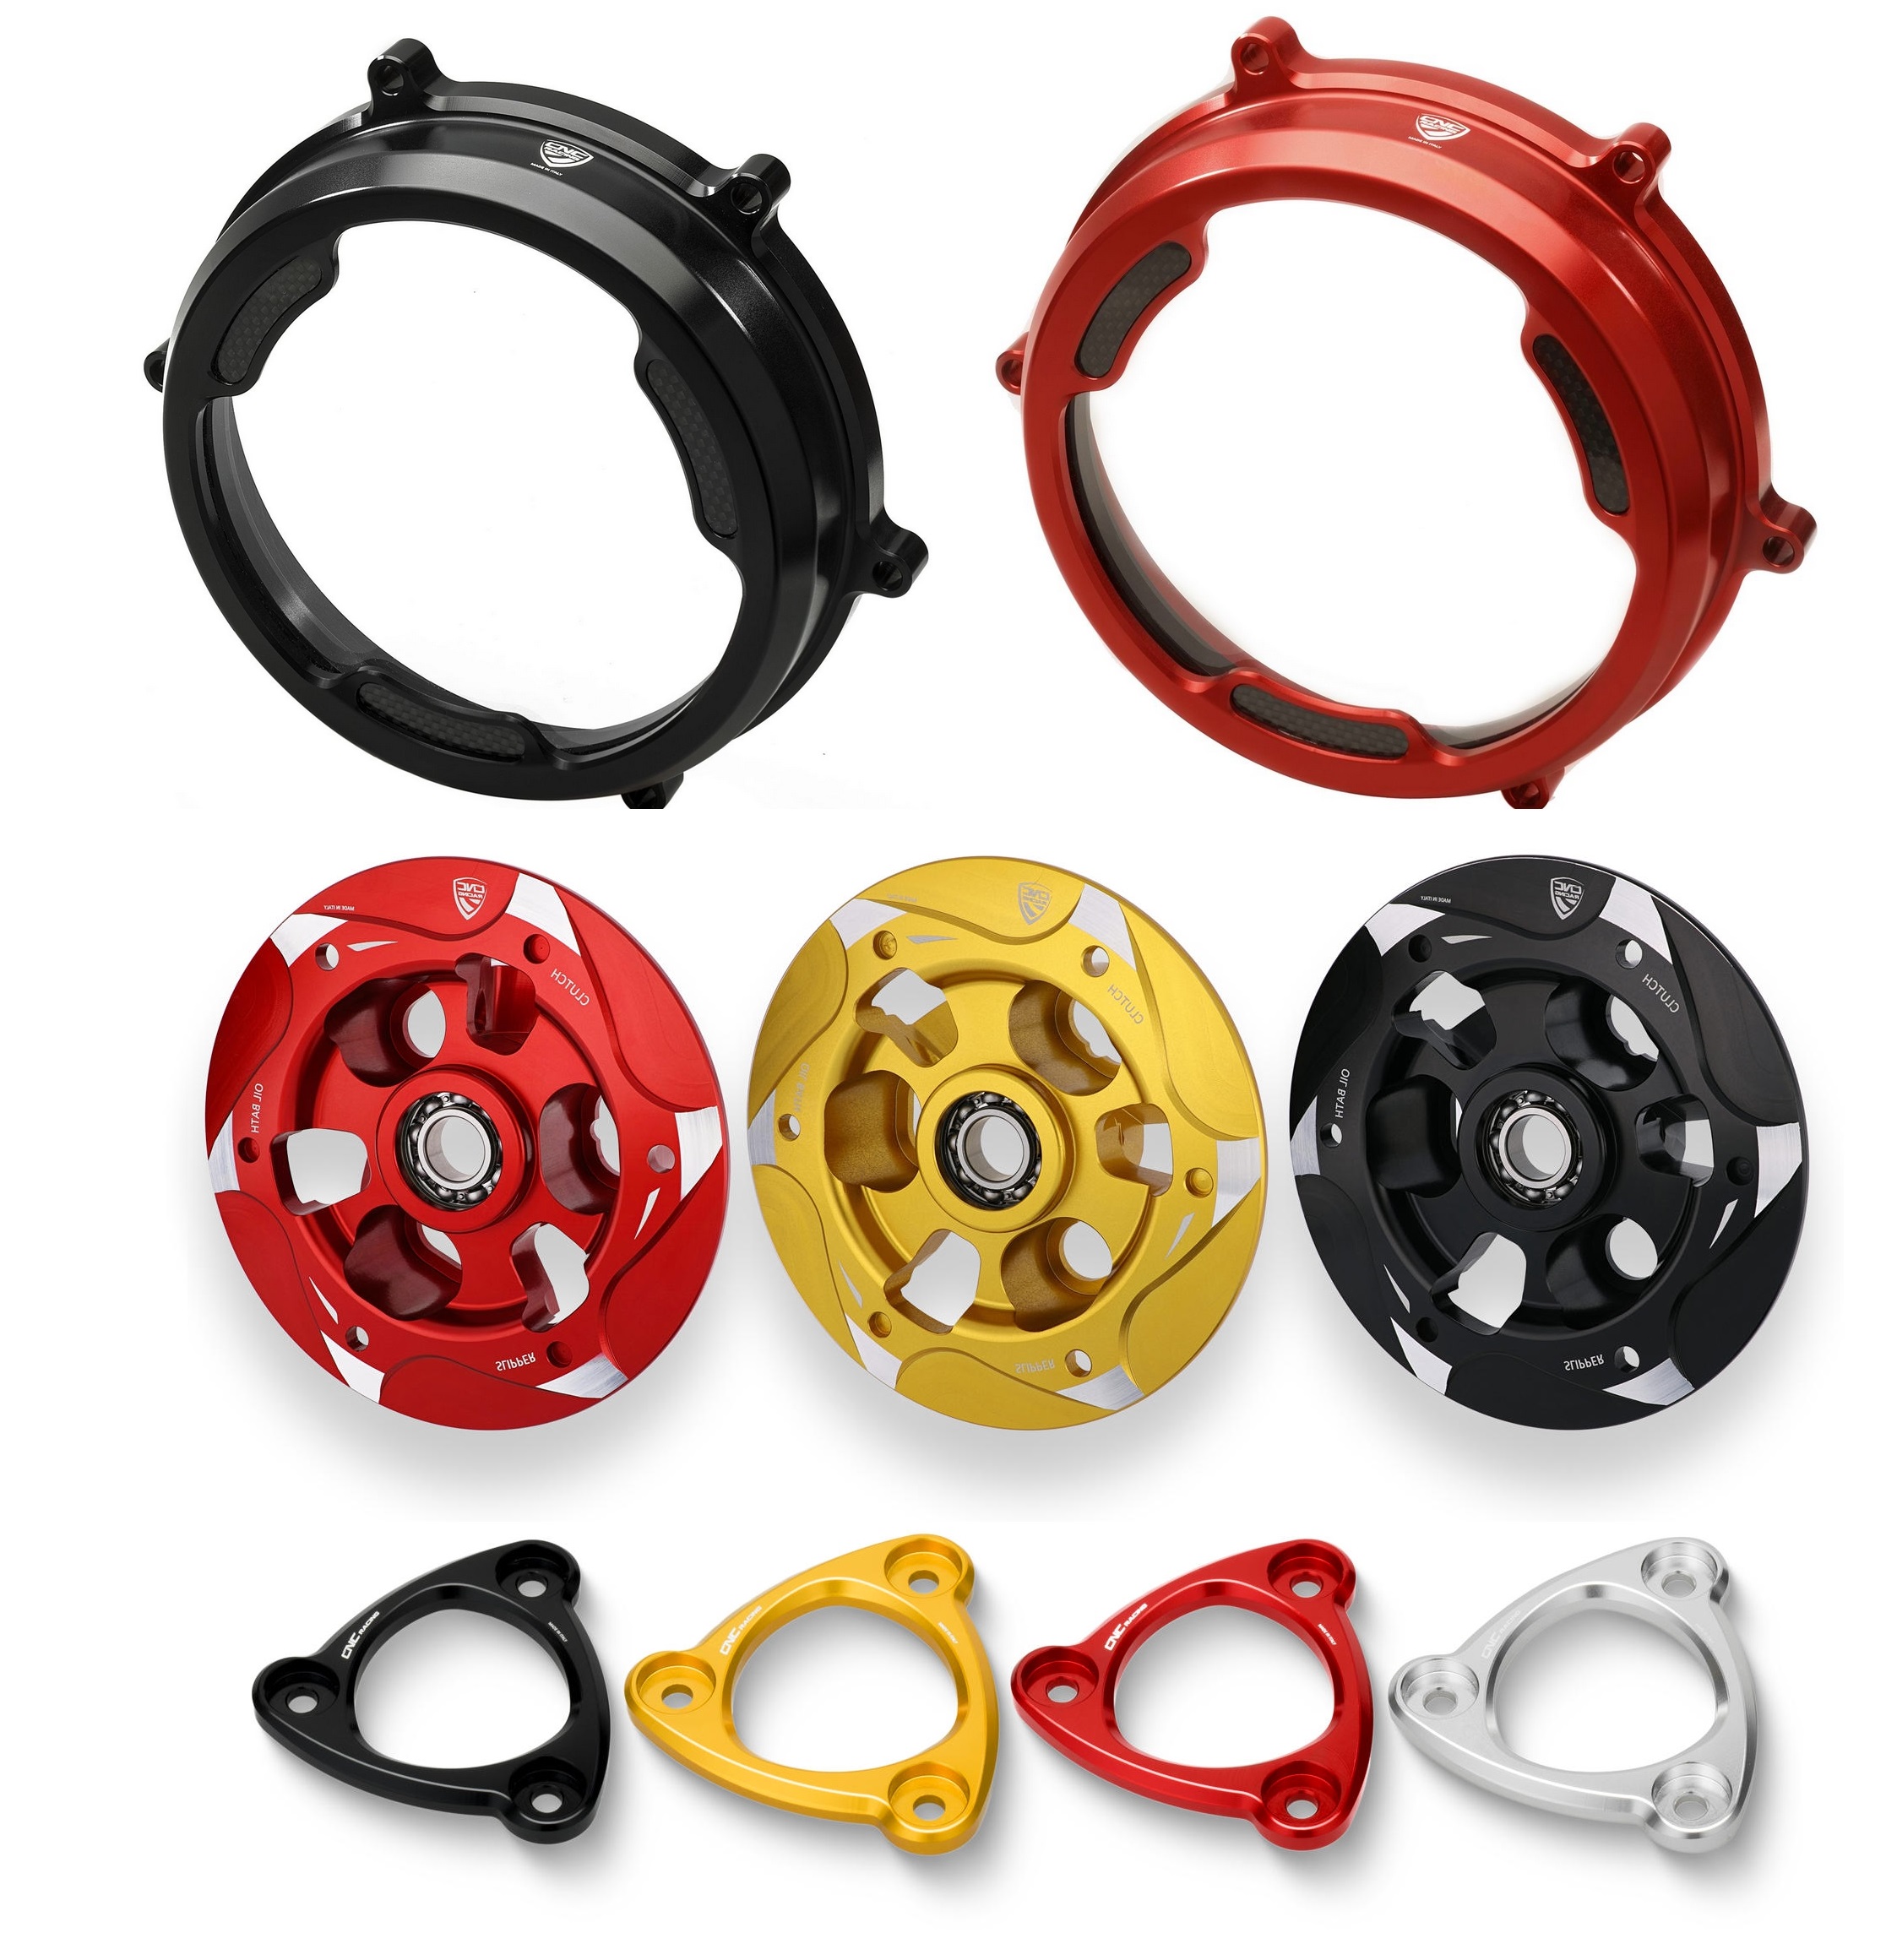 KIT PLEXIGLASS CLUTCH CLEAR COVER CNC RACING FOR DUCATI PANIGALE 1199 - 1299 - 959 - CA201+SP200S+SF200